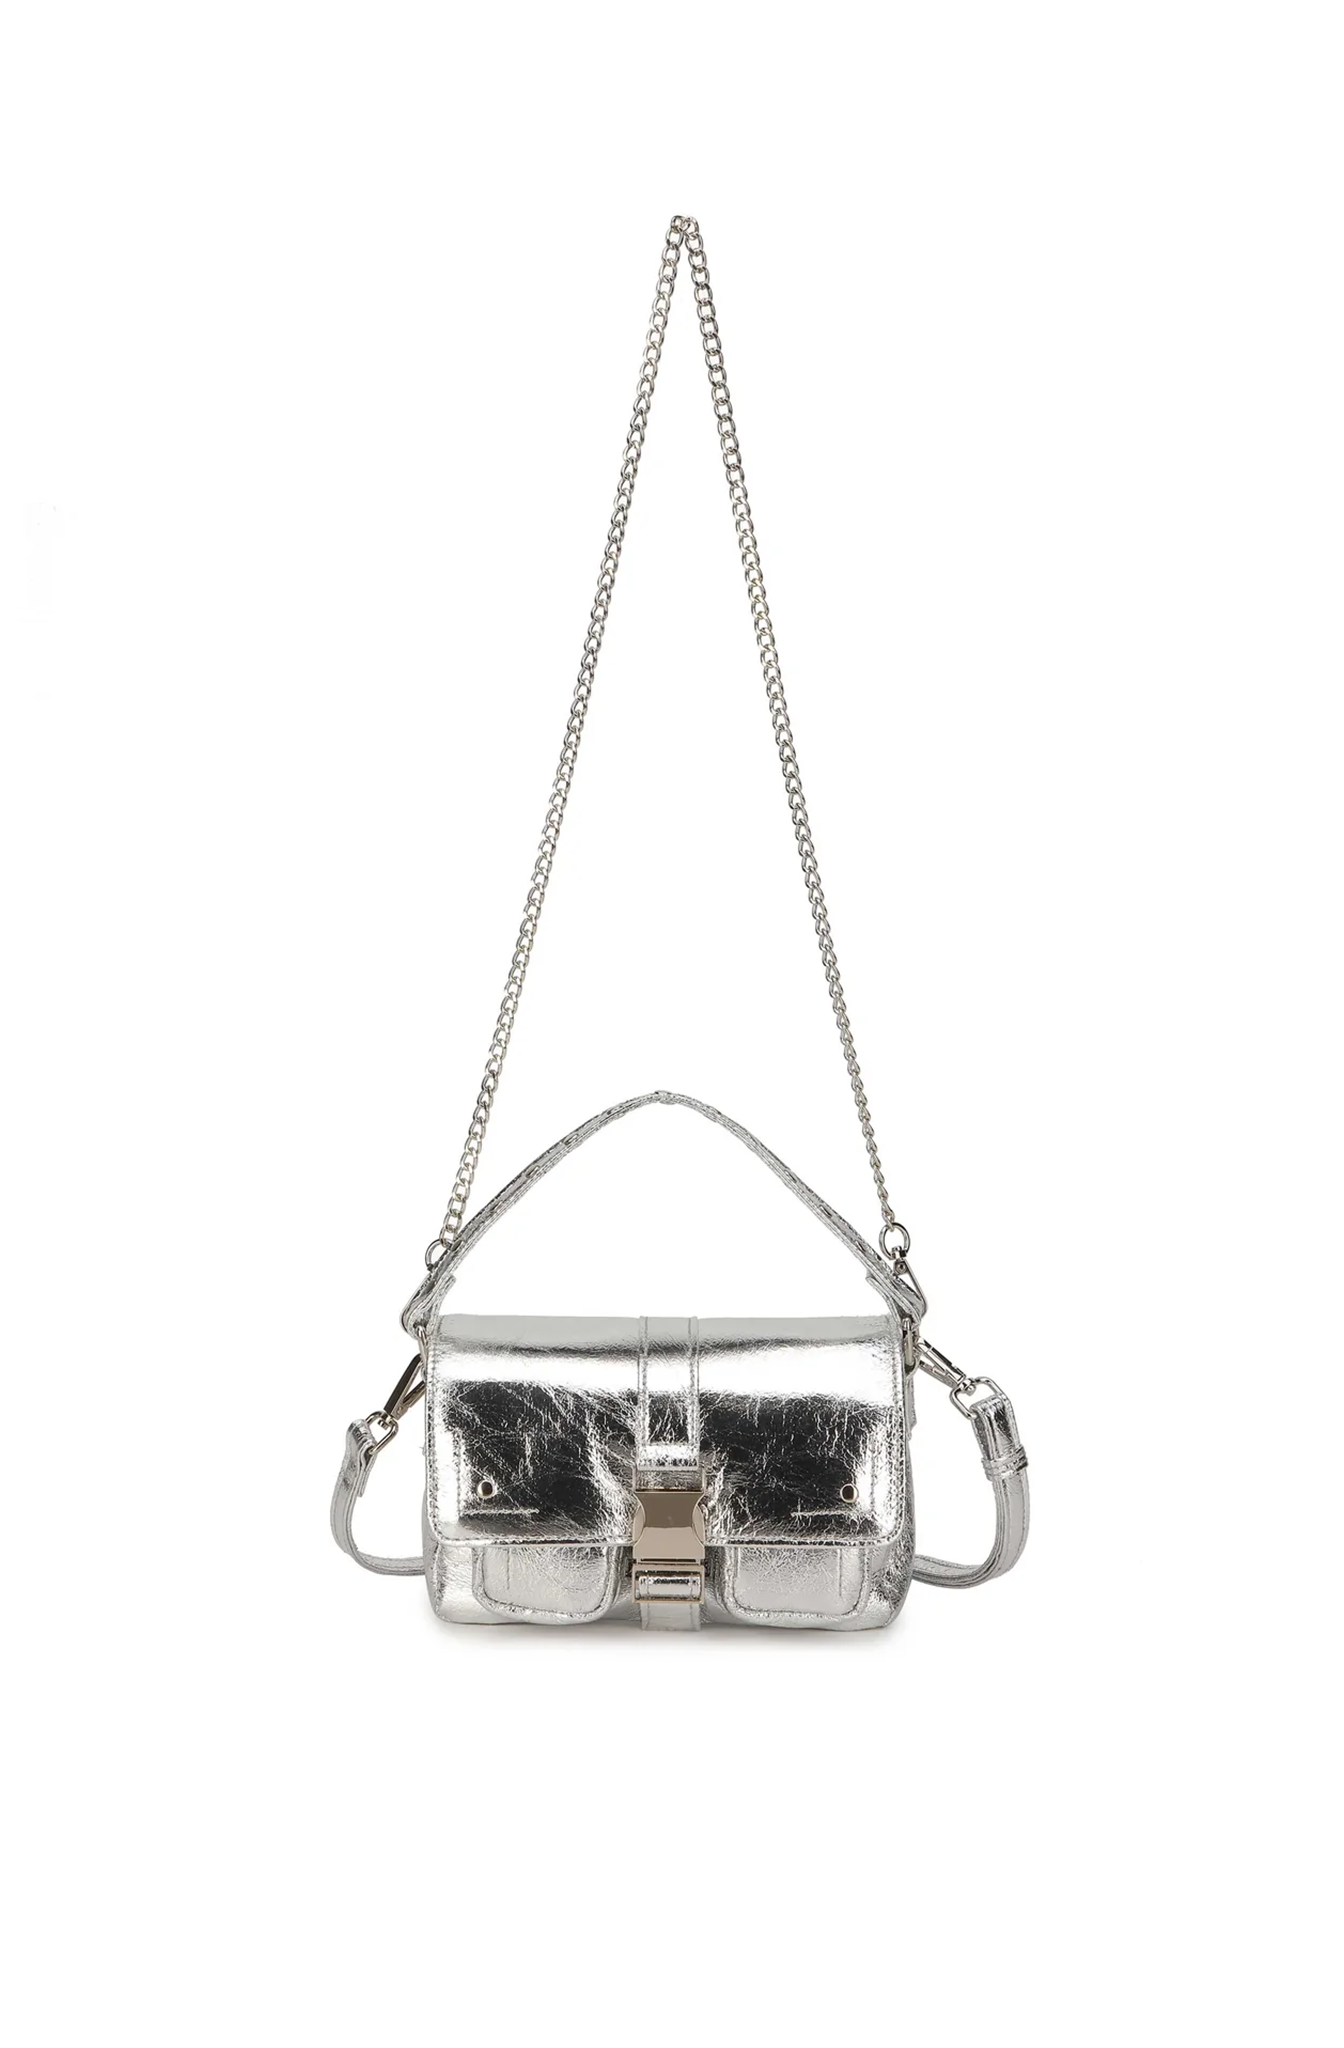 Mini Hilma cross bosy bag by Nunoo closes with a buckle. The bag has two open compartments. The bag comes with a chain and an adjustable strap.